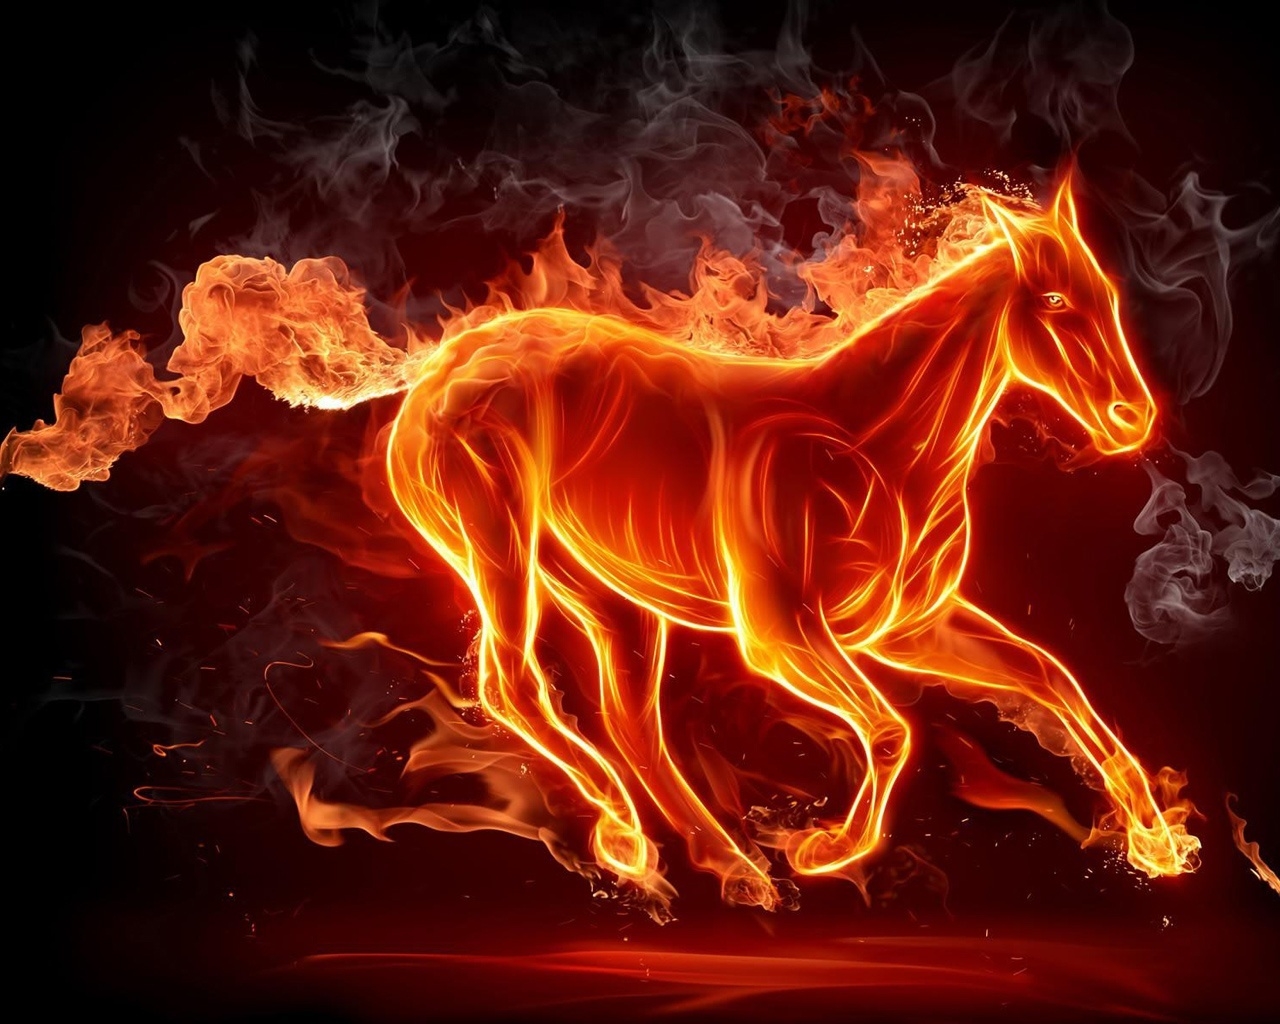 Fire Horse for 1280 x 1024 resolution